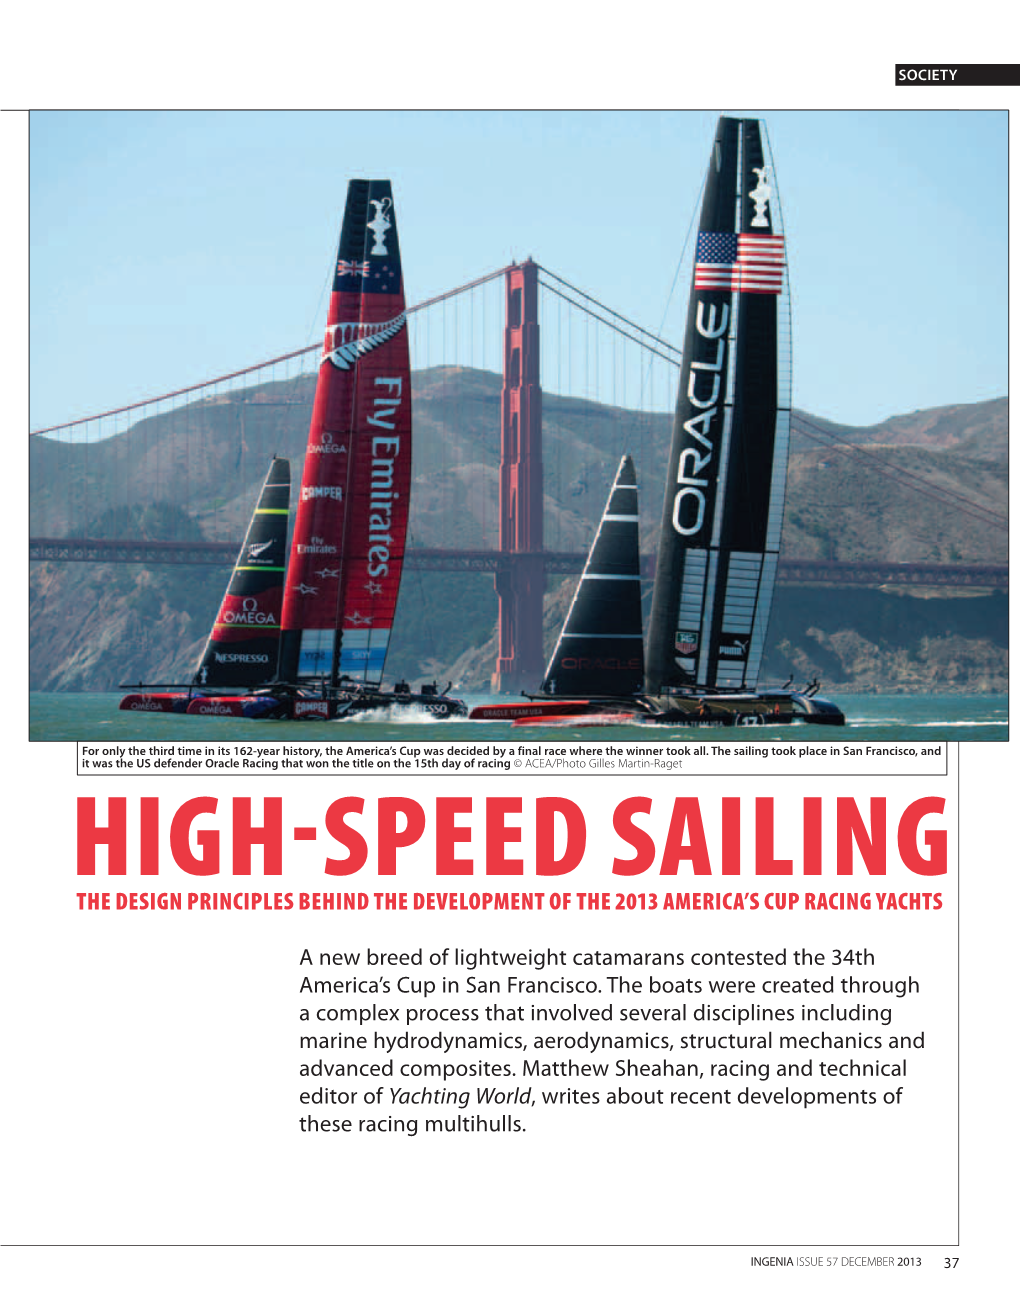 The Design Principles Behind the Development of the 2013 America’S Cup Racing Yachts